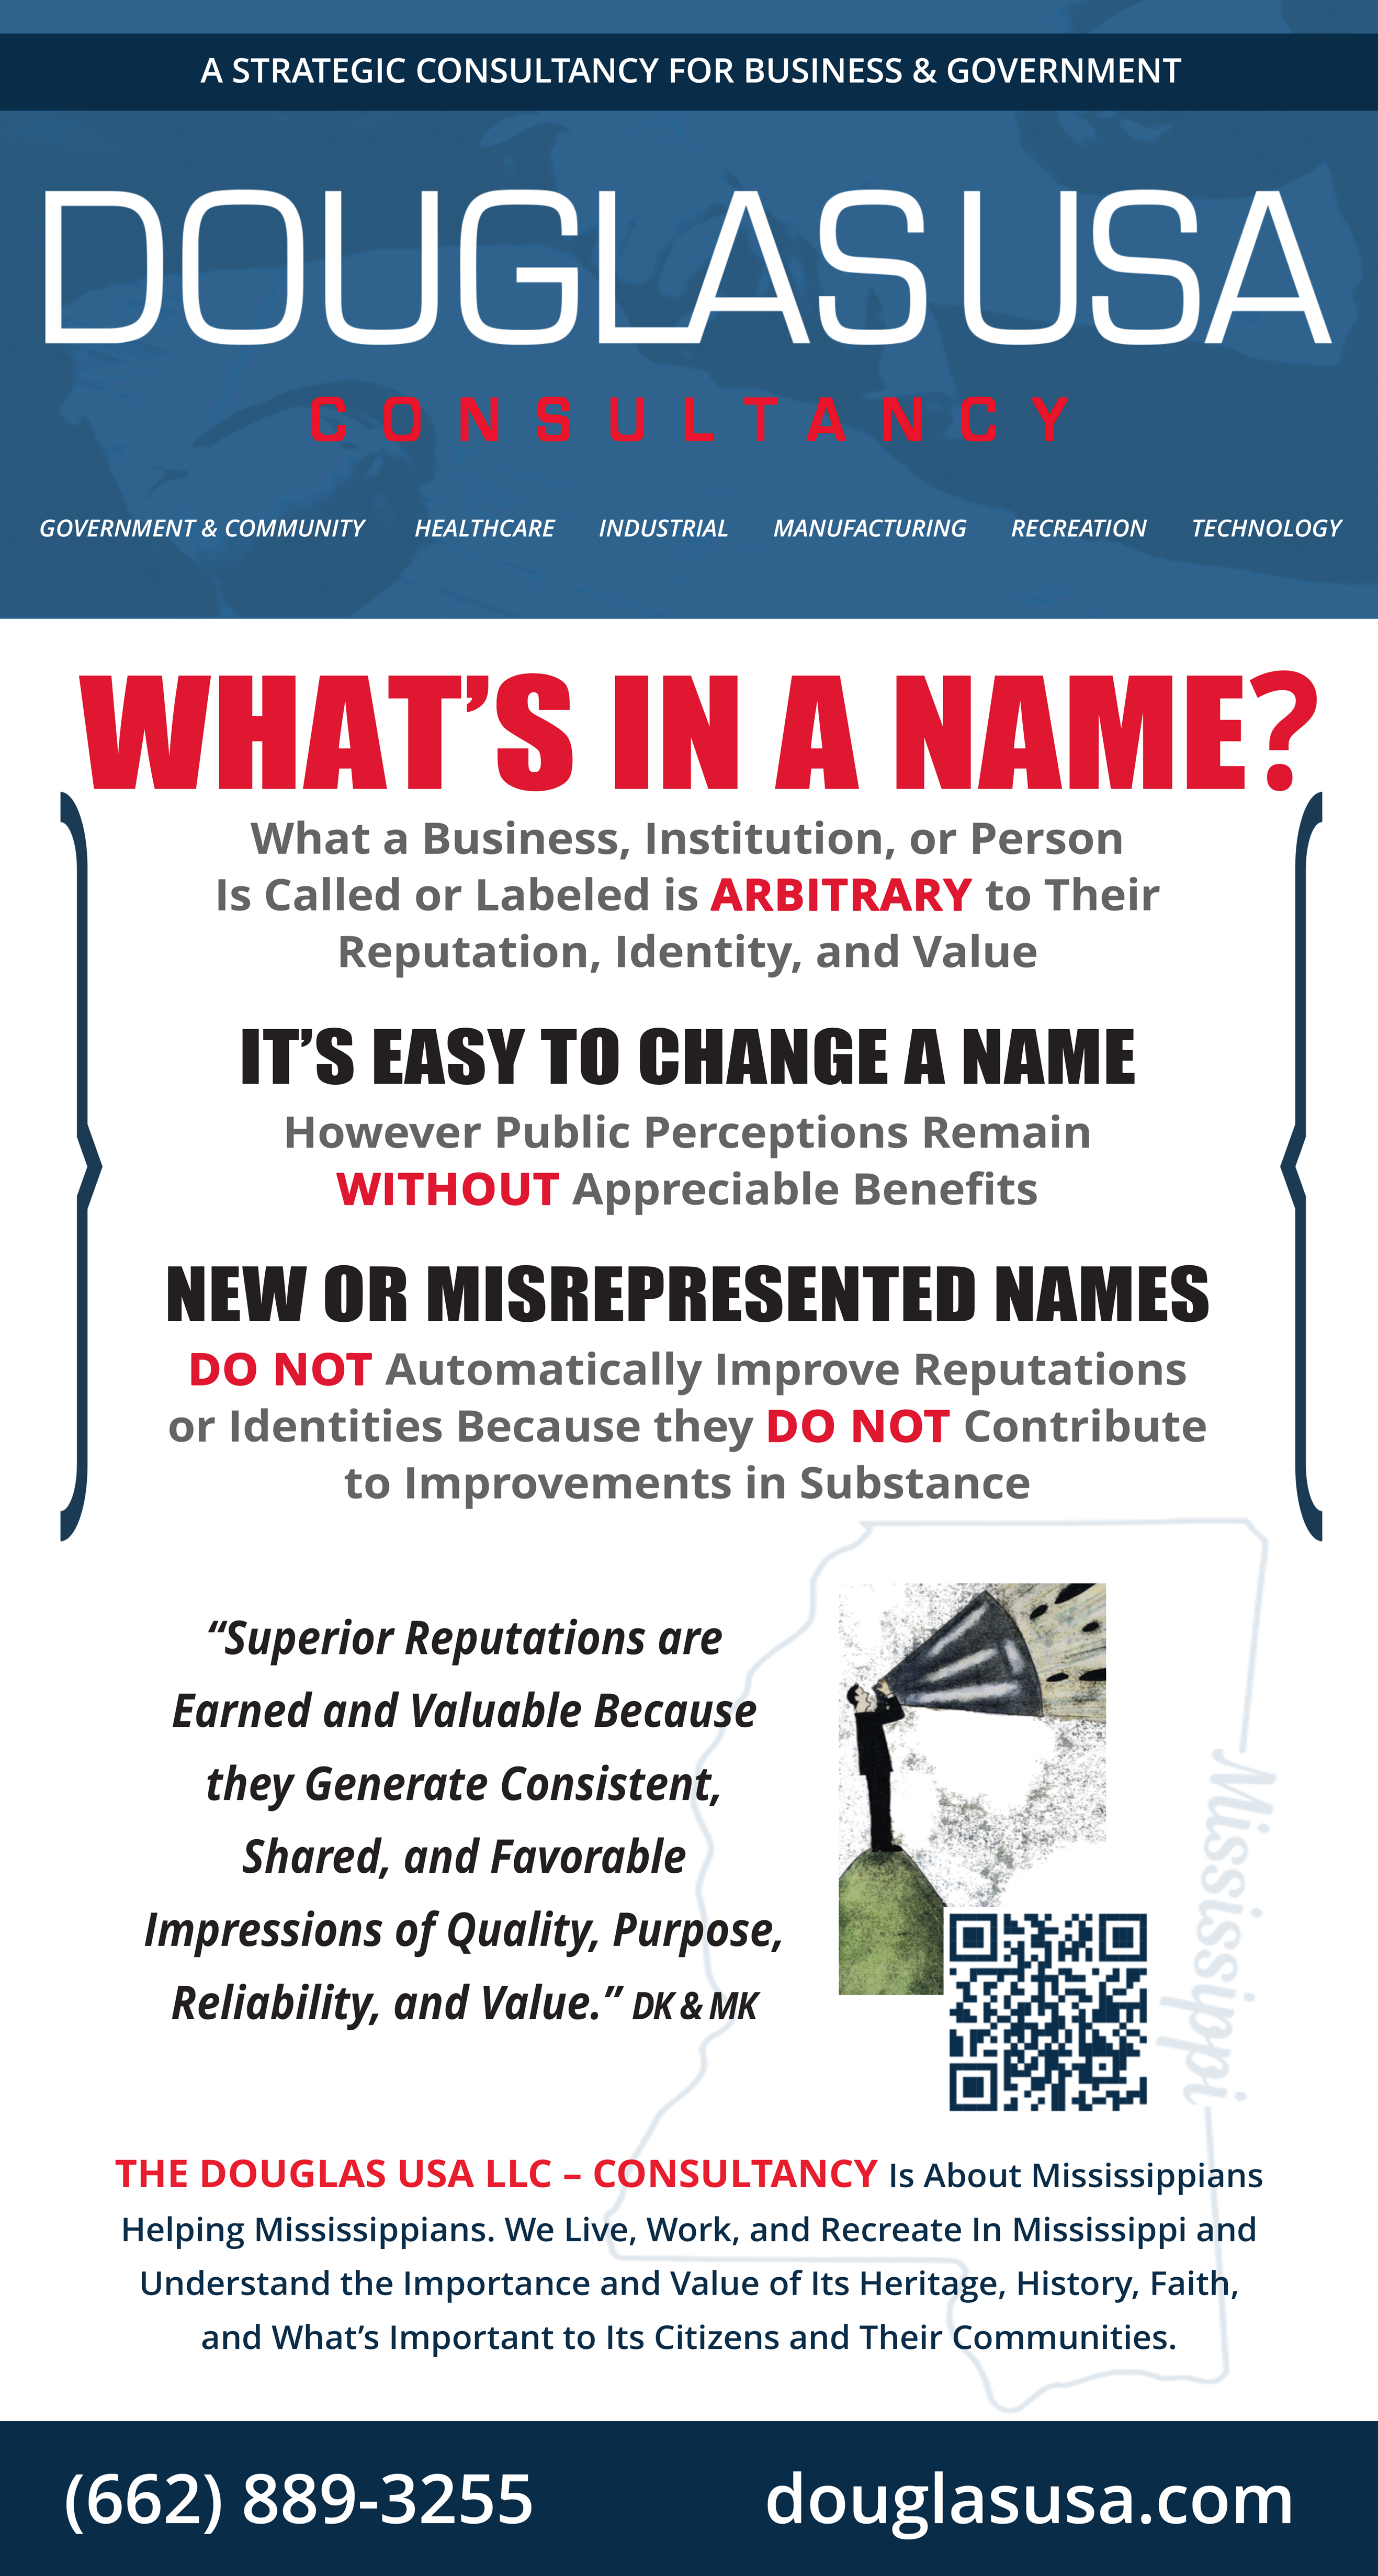 What a Business, Institution, or Person Is Called or Labeled is Arbitrary to Their Reputation, Identity, and Value.  It’s EASY to Change a Name, But Public Perceptions REMAIN WITHOUT APPRECIABLE BENEFITS. 